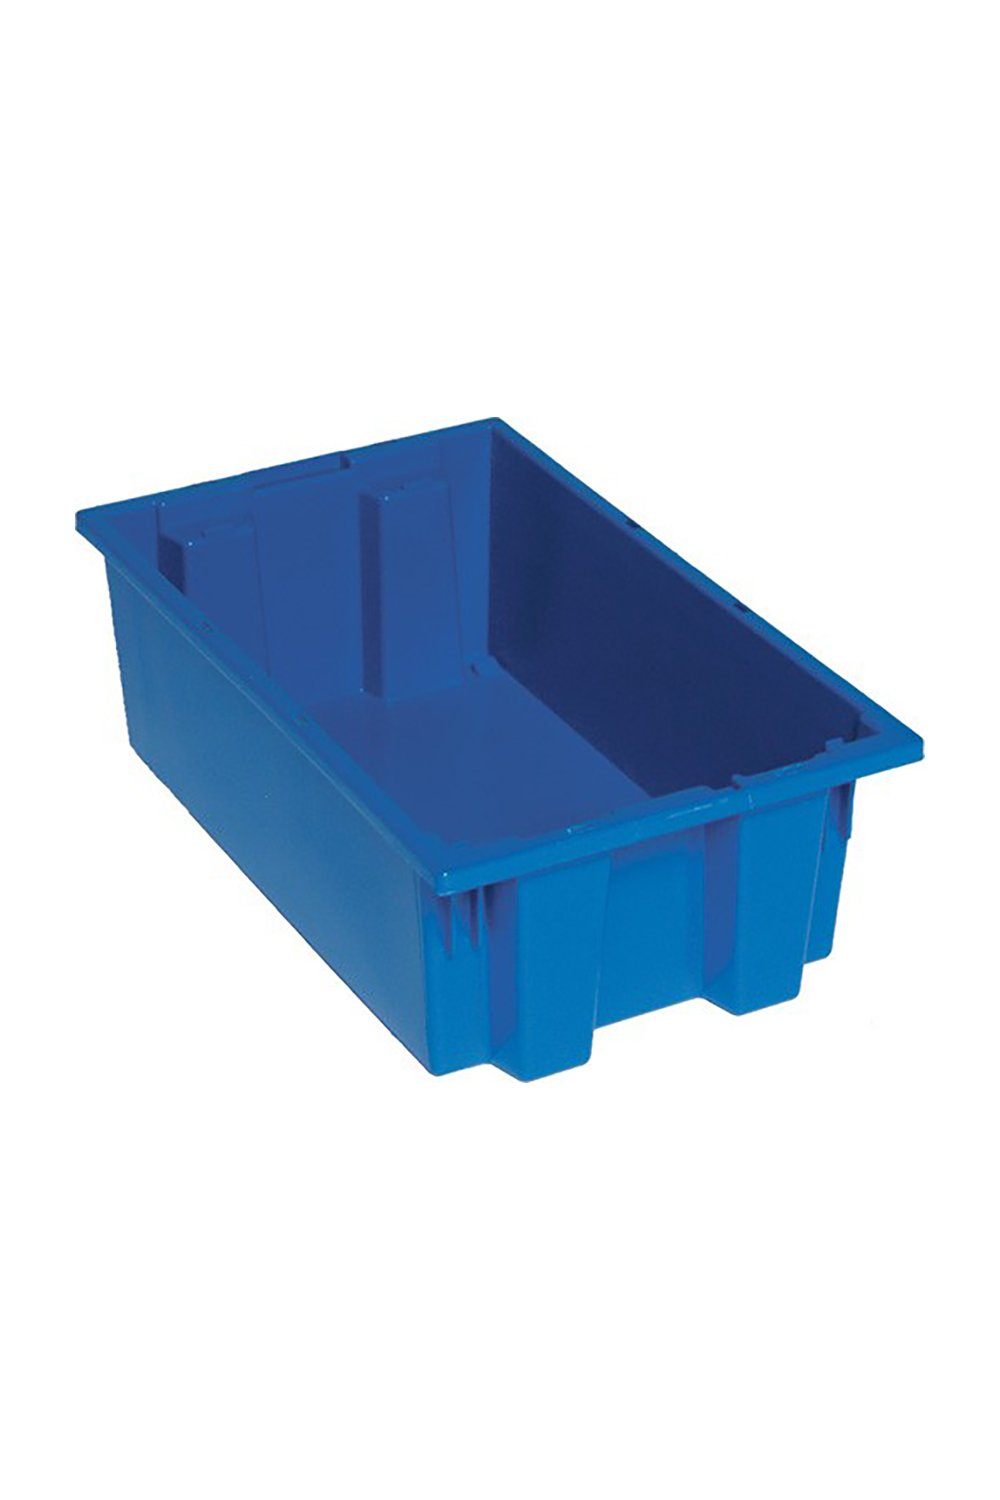 Stack and Nest Tote Bins & Containers Acart 